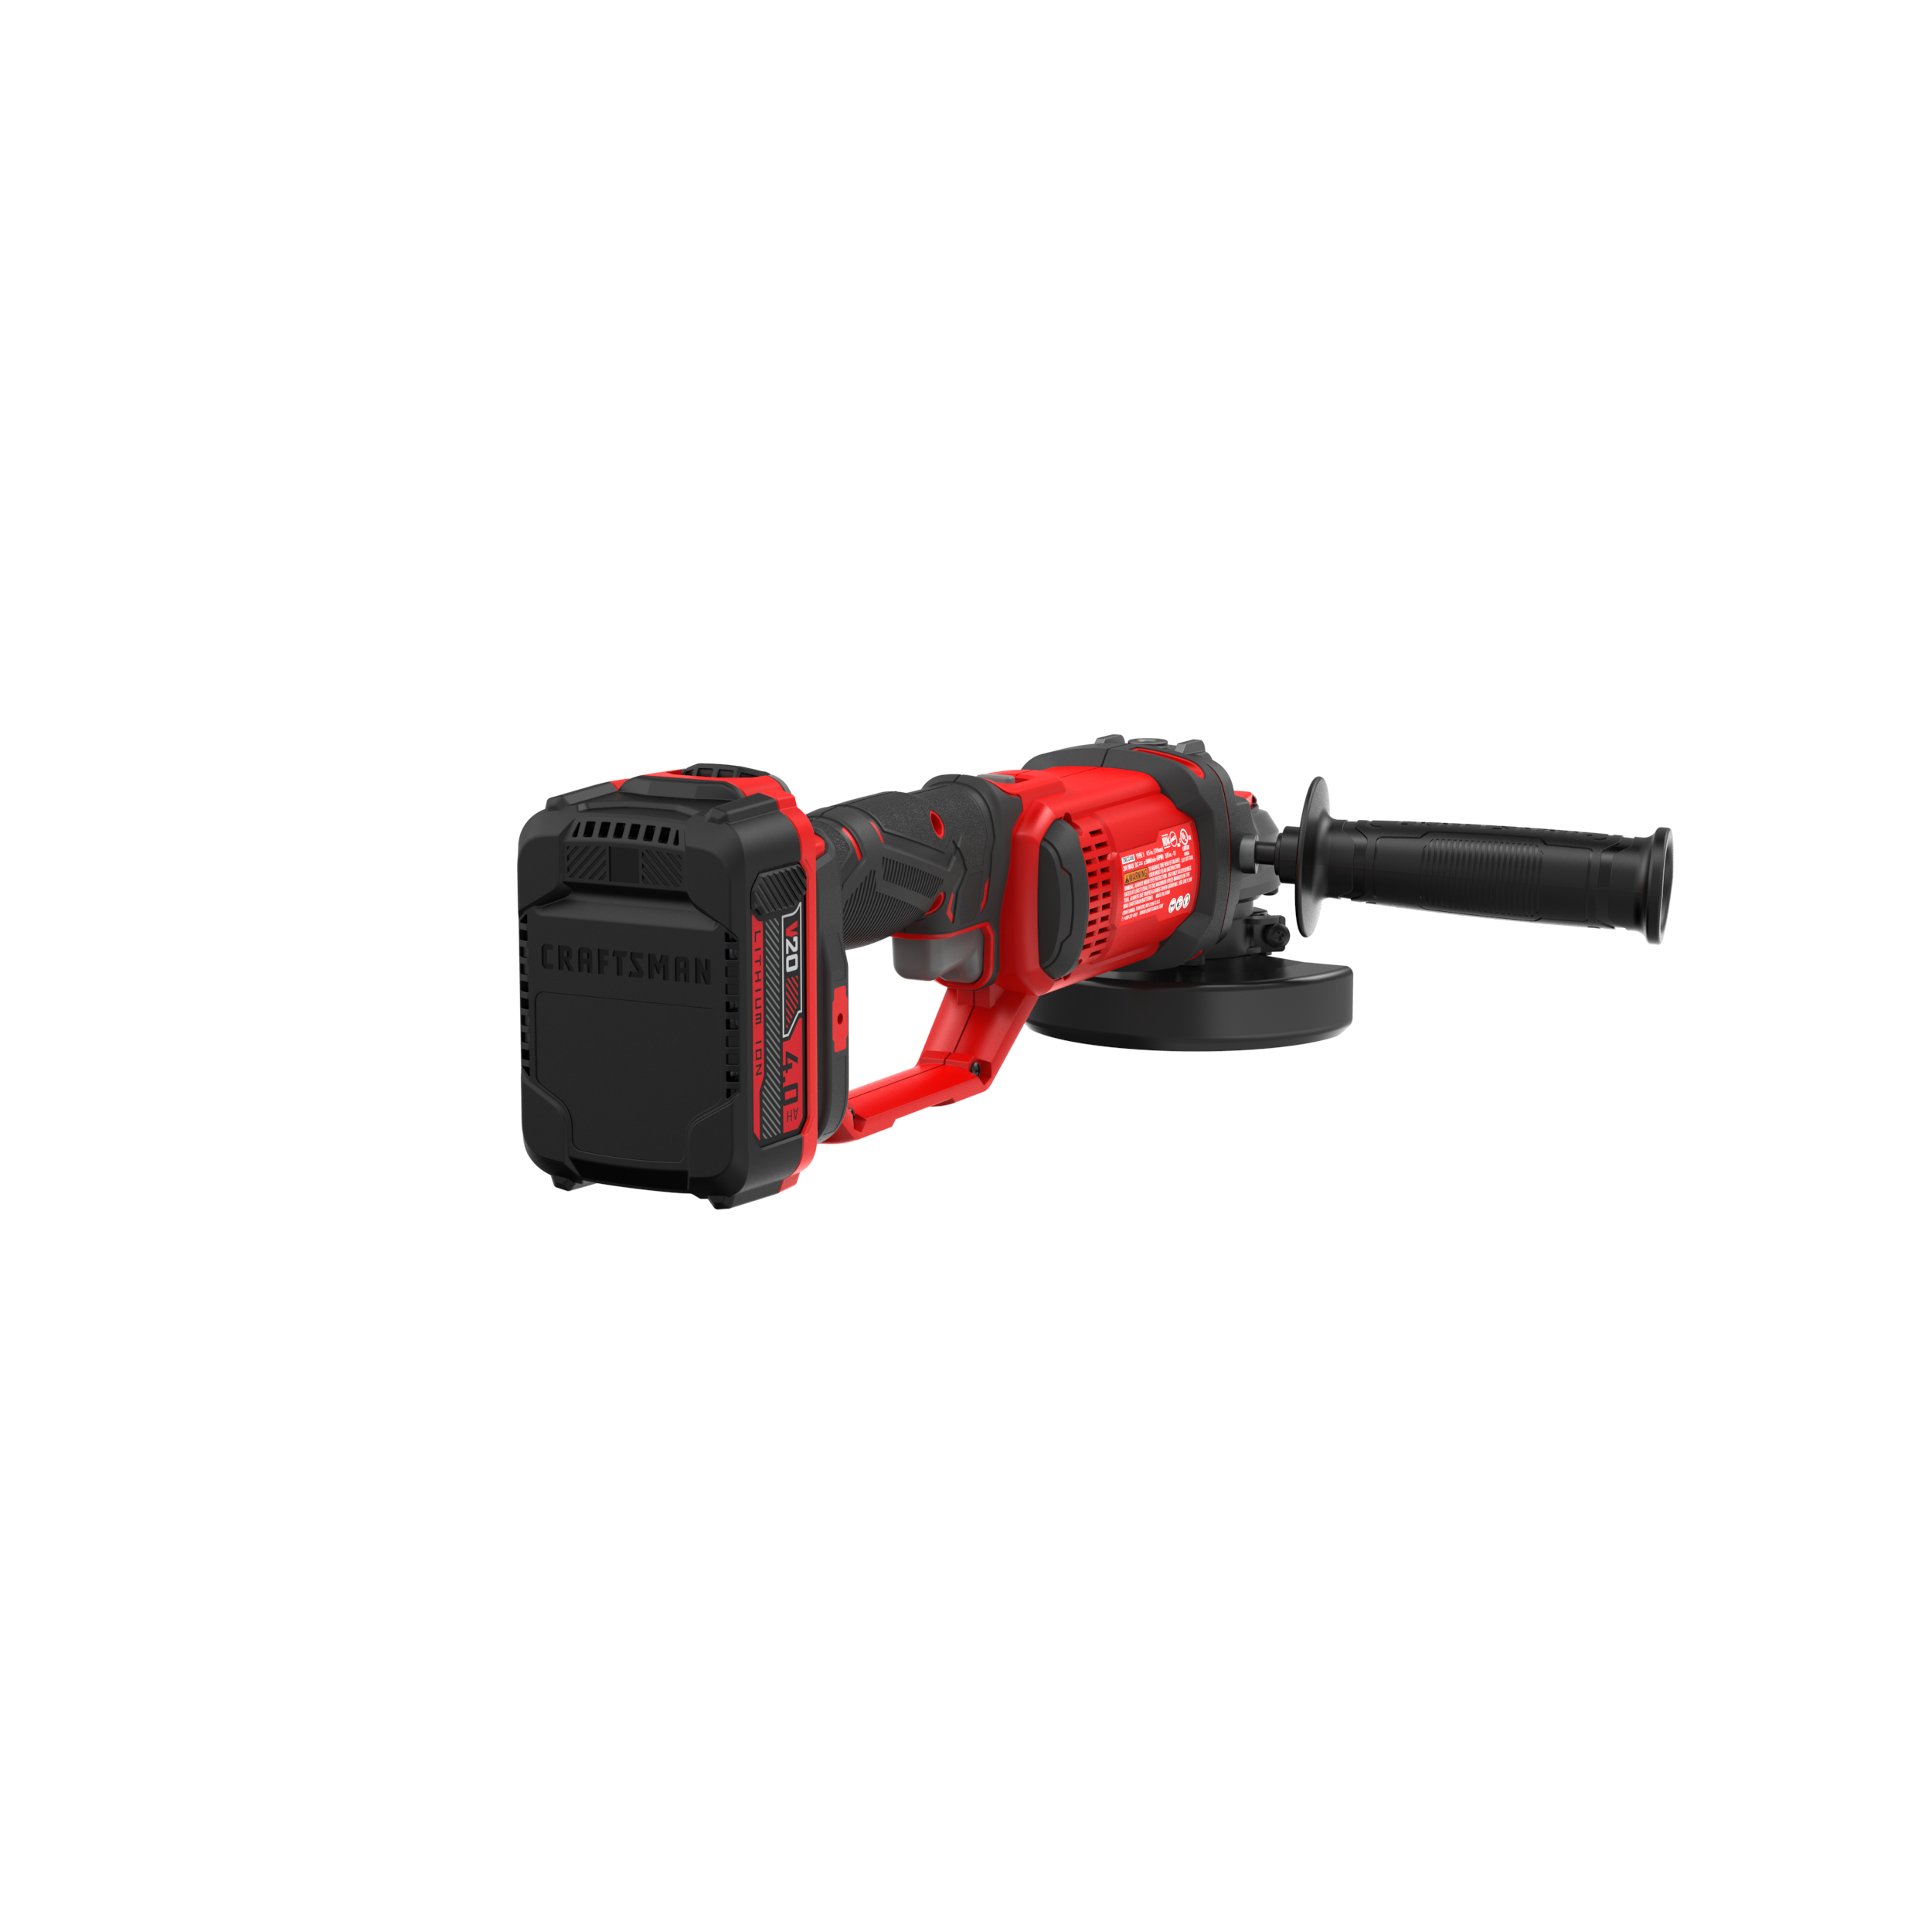 V20* Cordless 4-1/2-in Small Angle Grinder Kit (1 Battery) | CRAFTSMAN